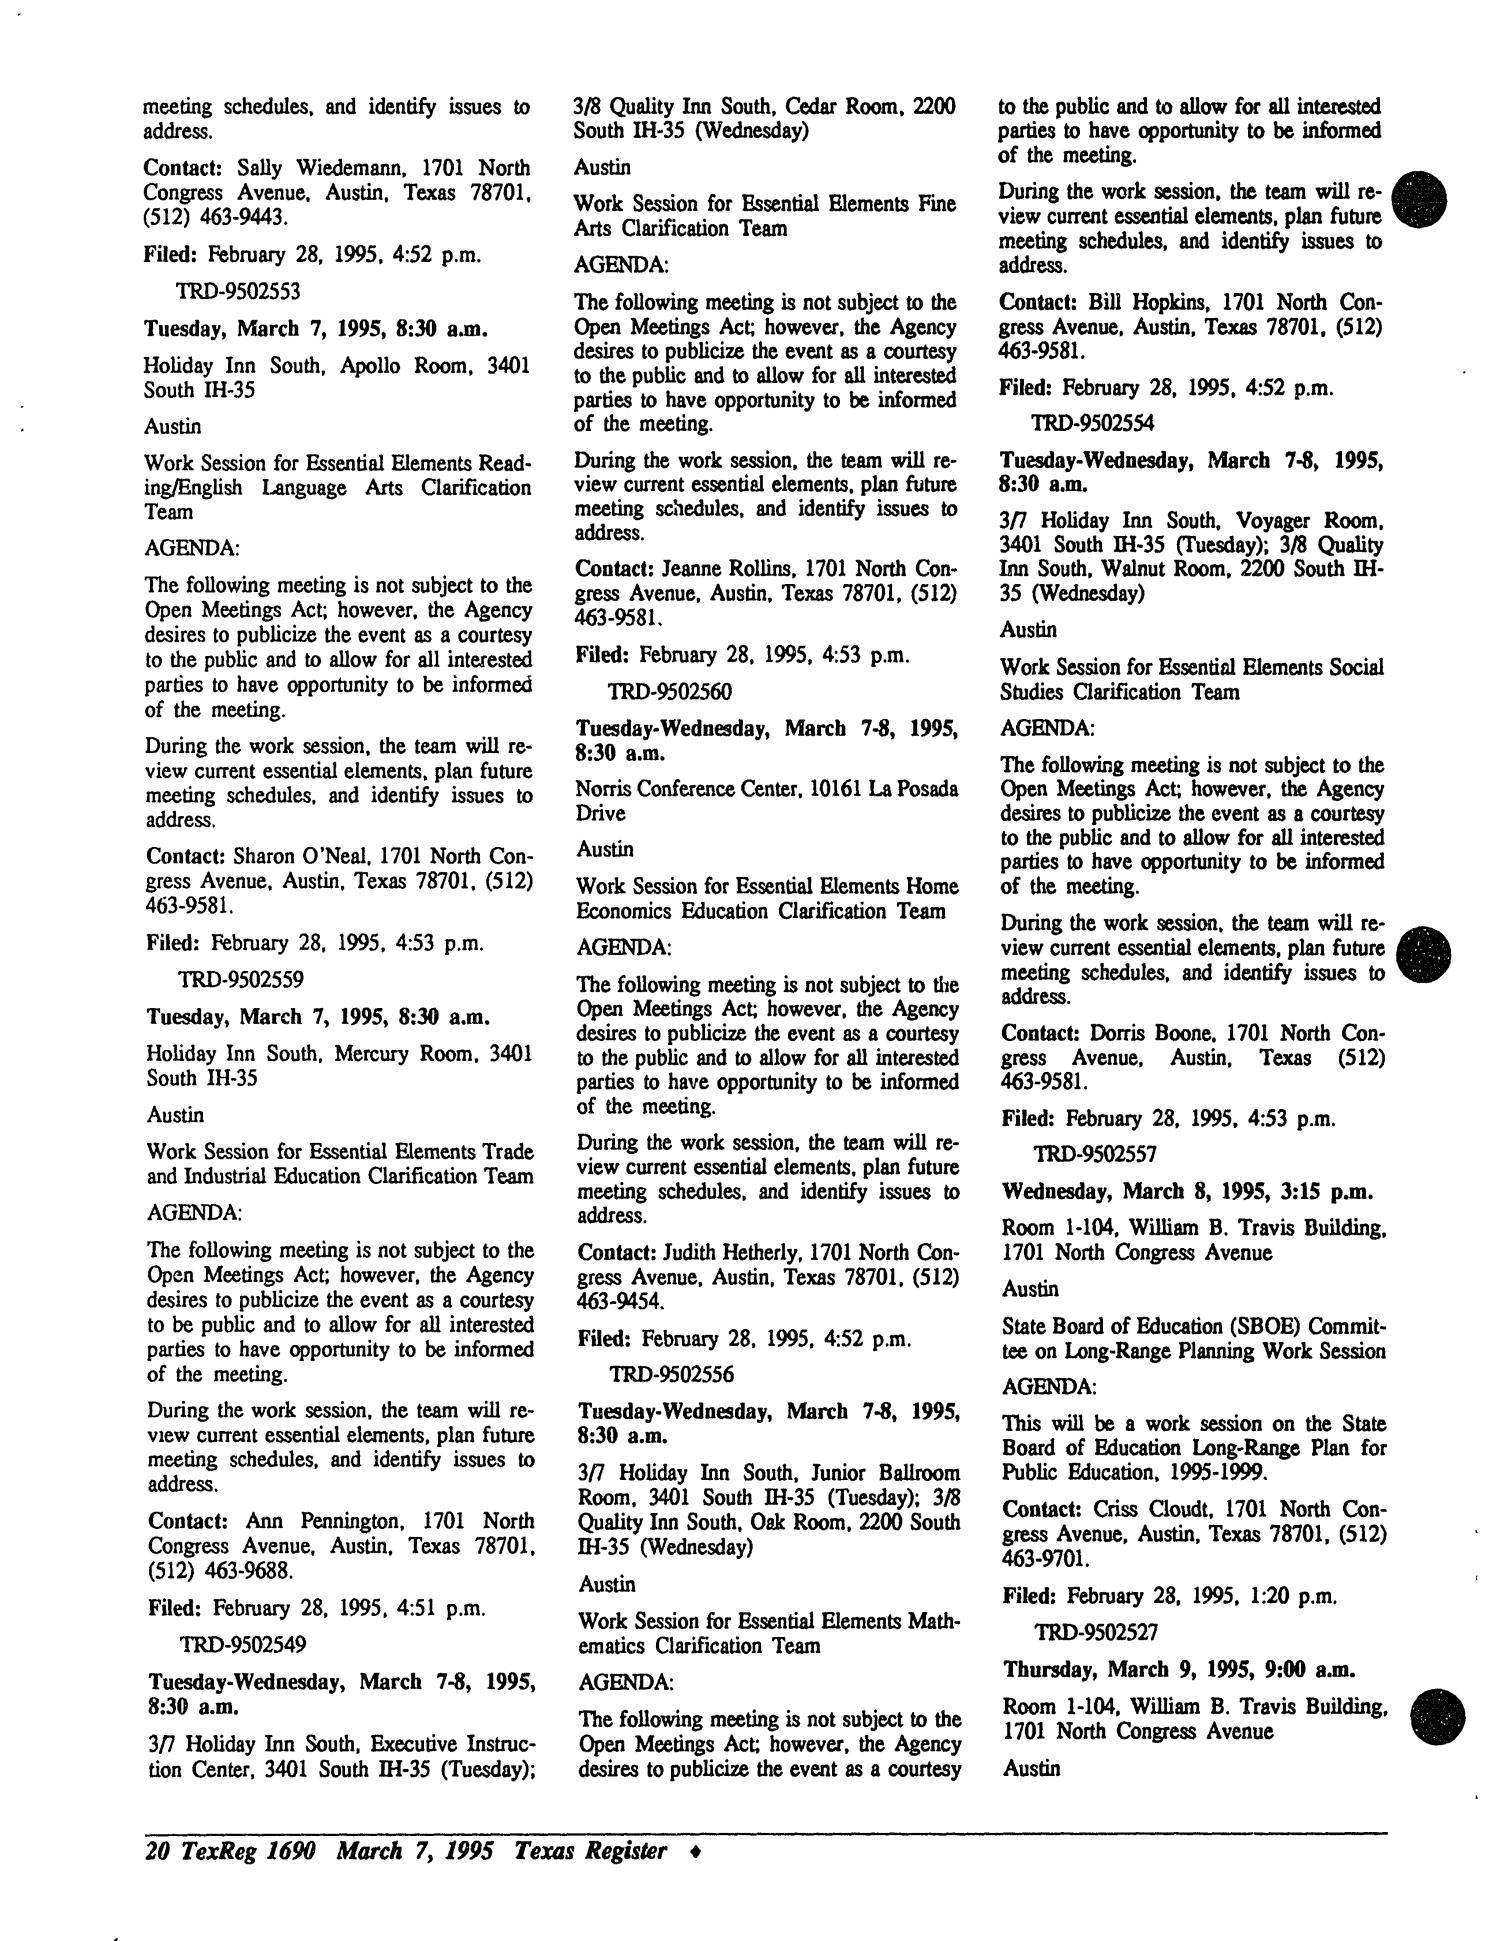 Texas Register, Volume 20, Number 18, Pages 1591-1715, March 7, 1995
                                                
                                                    1690
                                                